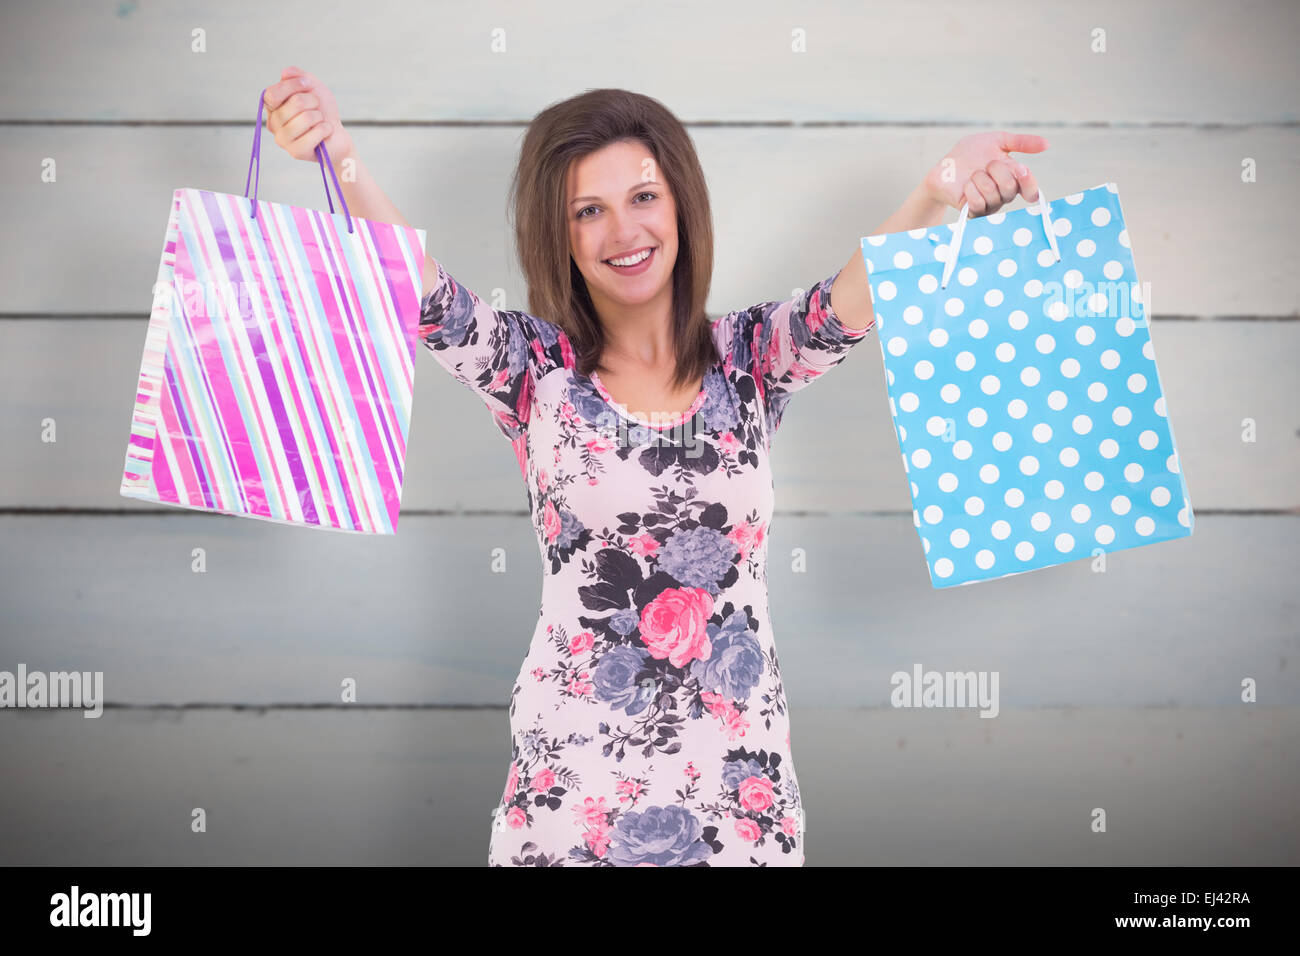 Composite image of young woman in floral dress holding up shopping bags Stock Photo